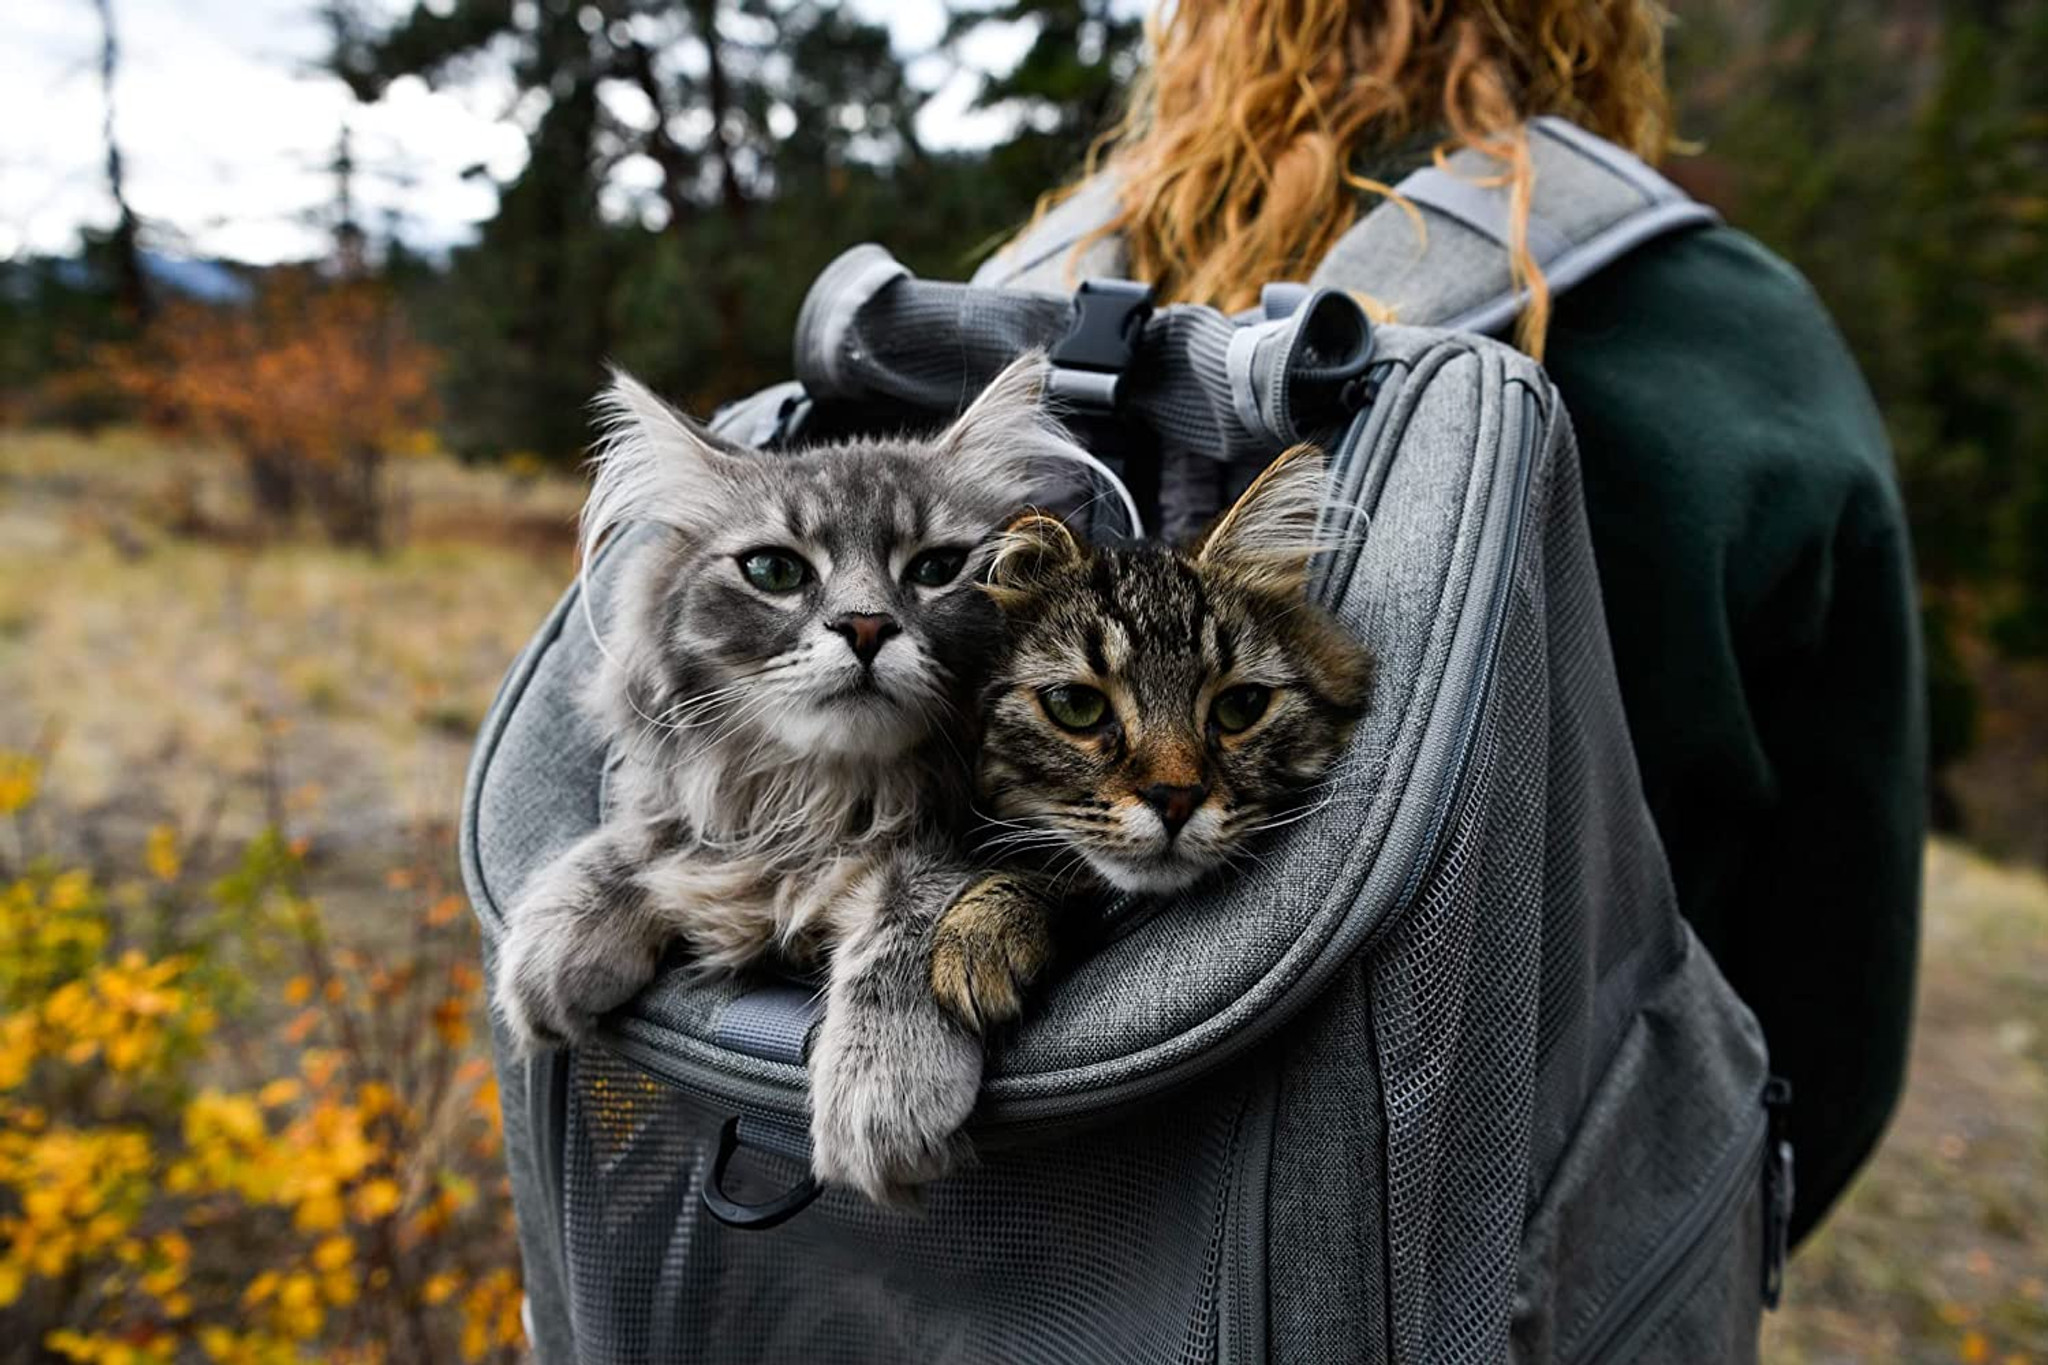 The Transpurrter Ultimate Calming Convertible Cat Carrier in Heather Grey and Teal / Your Cat Backpack